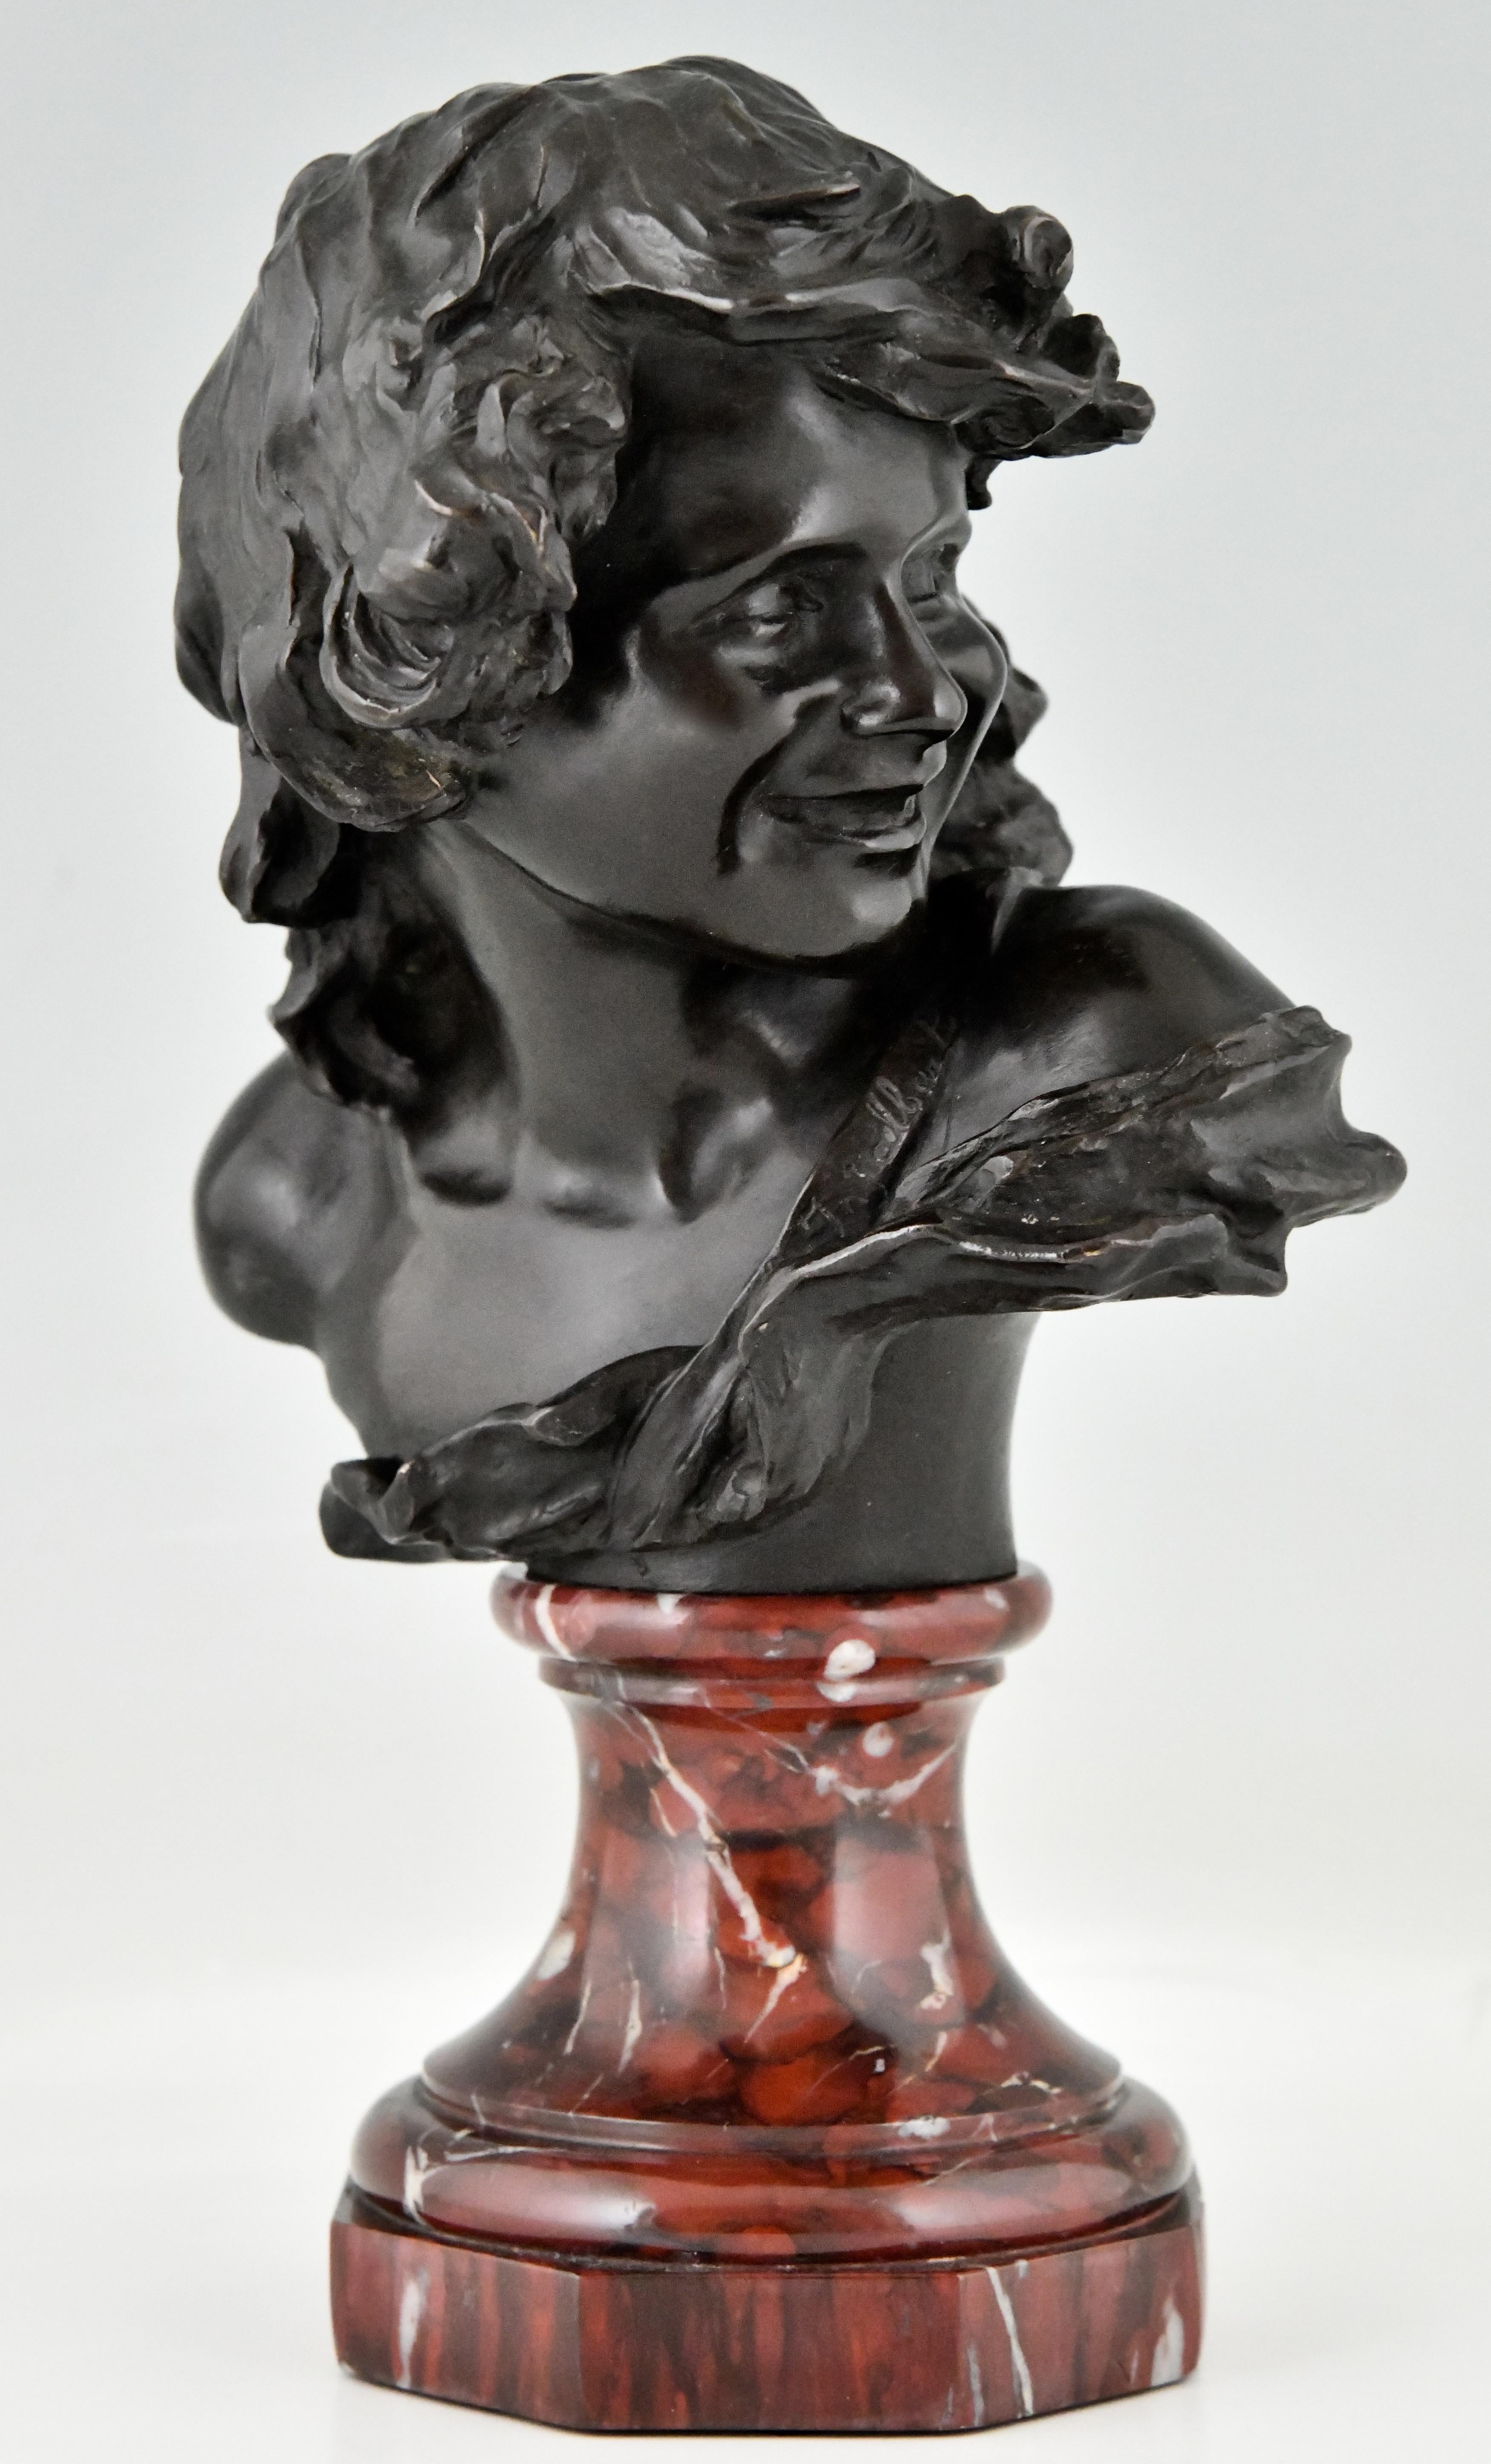 Early 20th Century Antique Bronze Bust of a Smiling Child by Injalbert Foundry Mark Siot France 190 For Sale